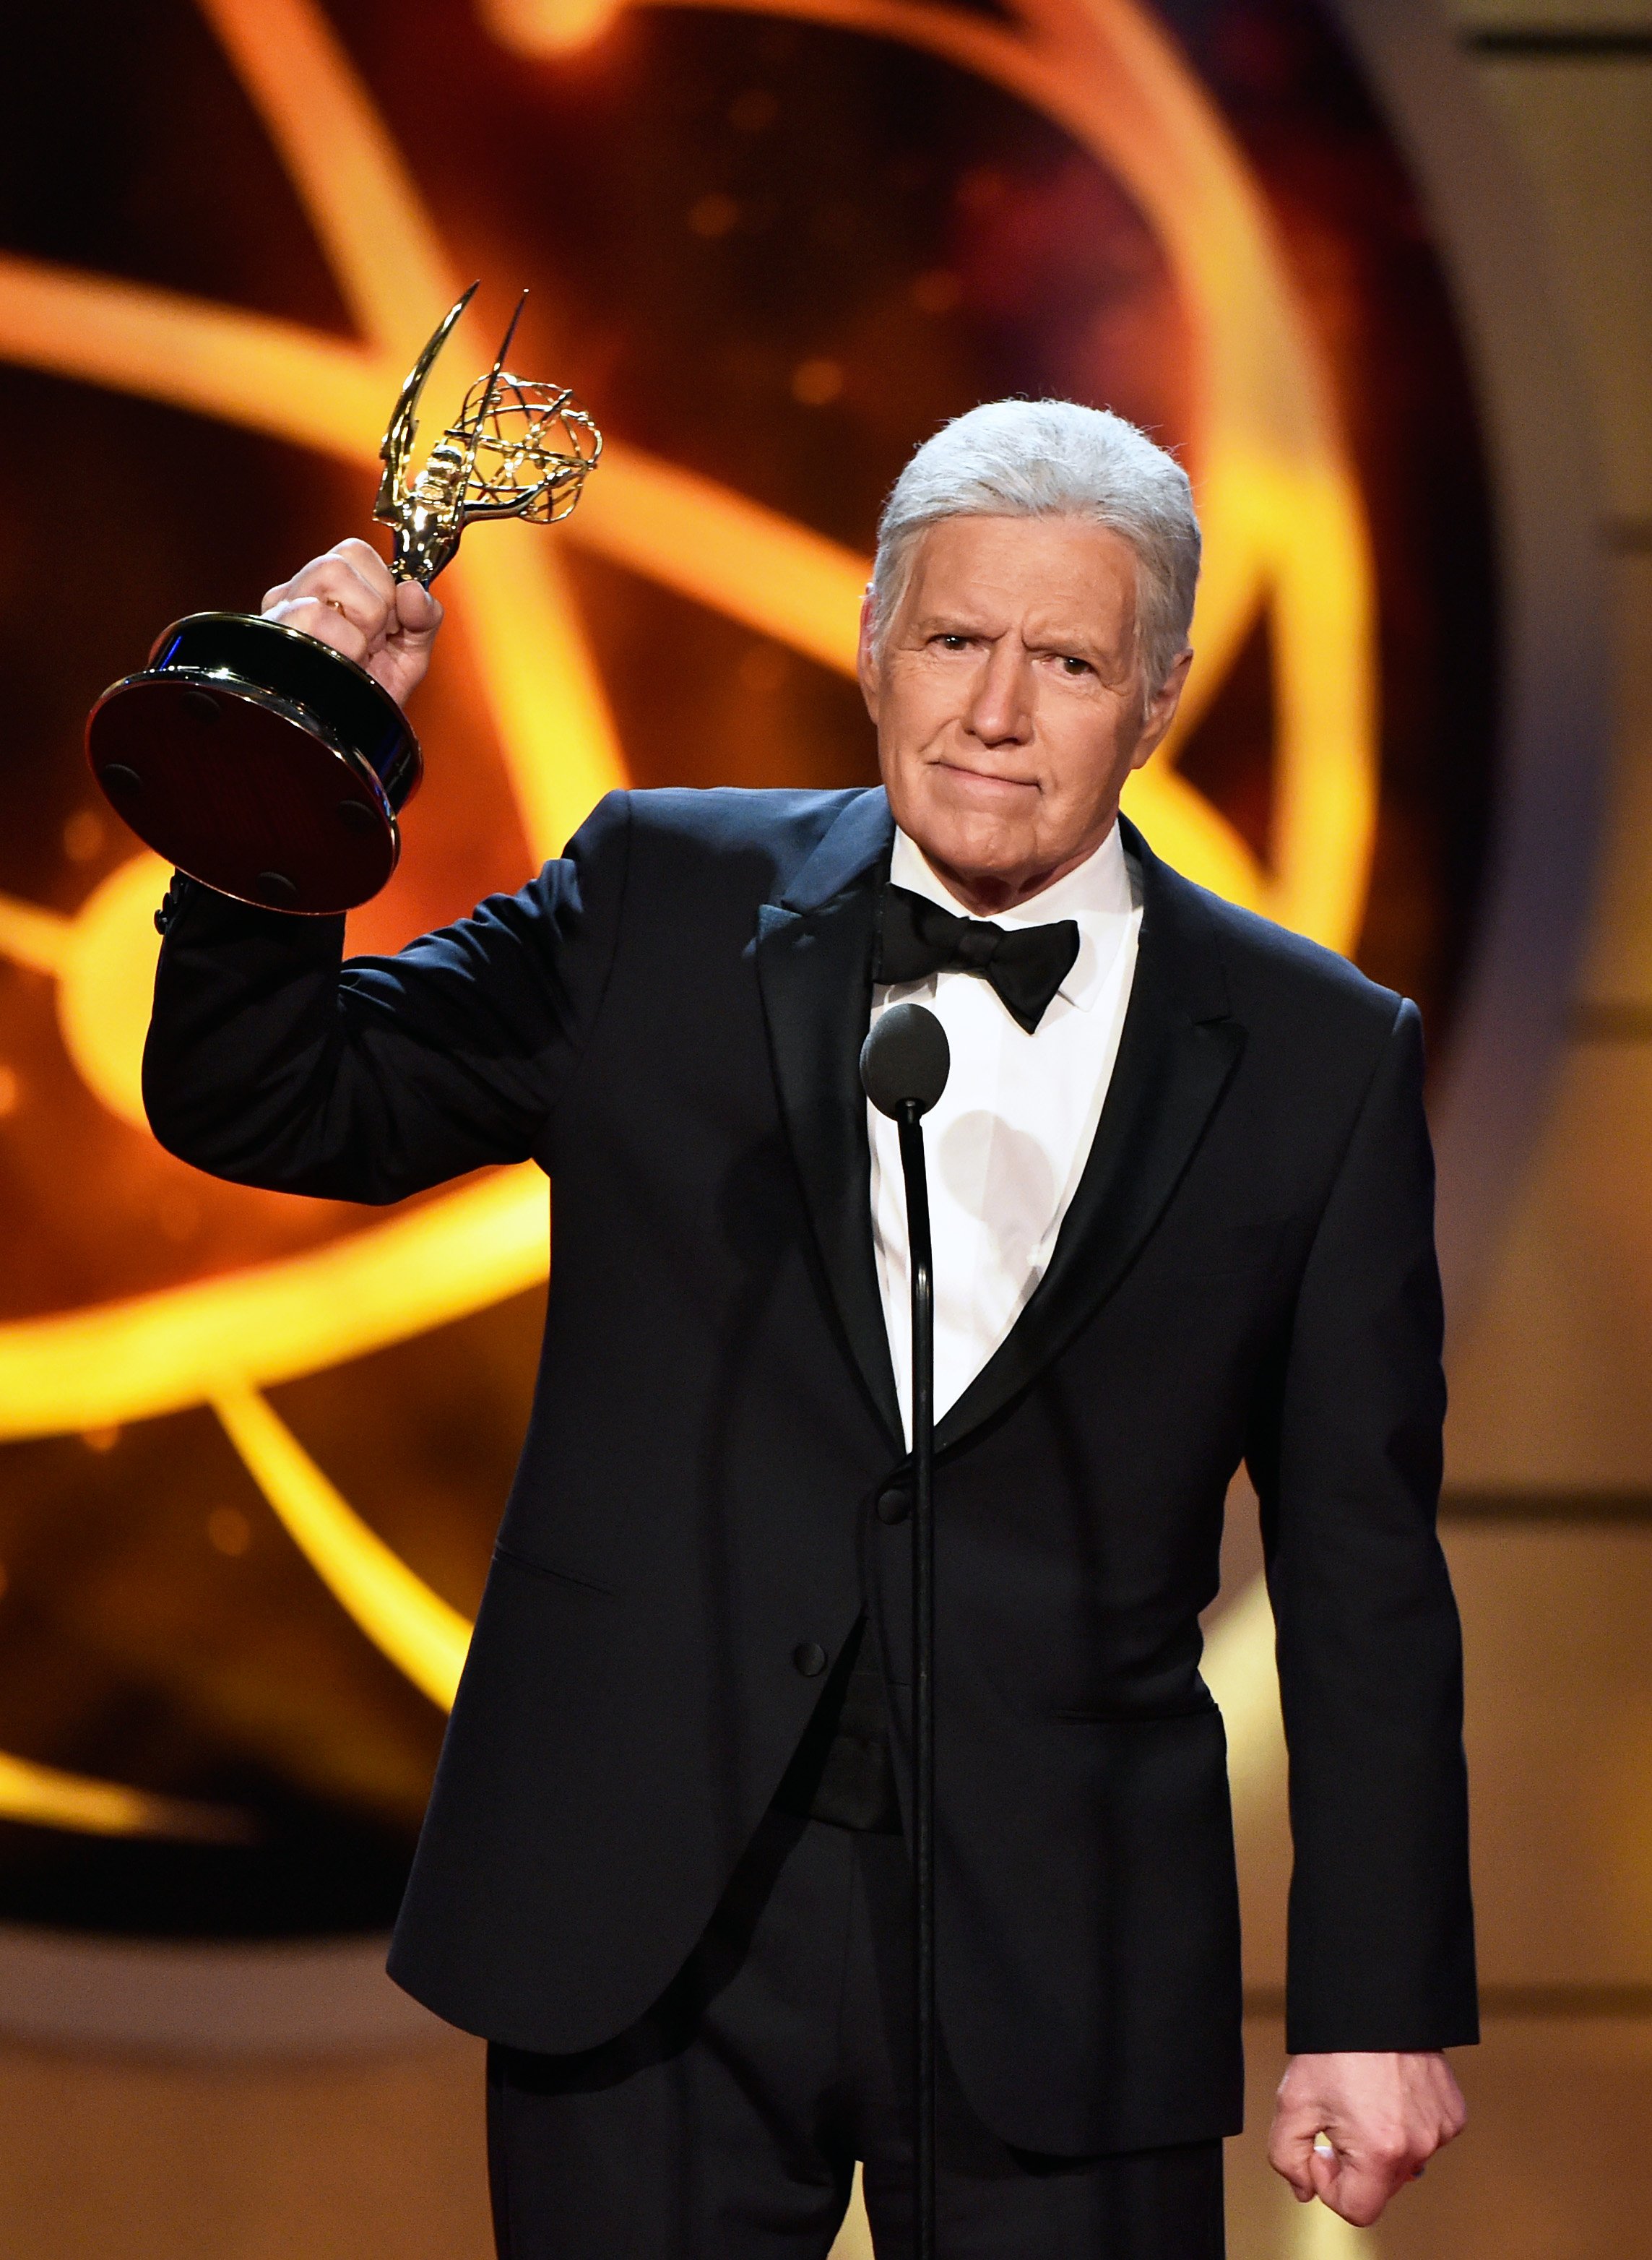 Alex Trebek attends the 46th Annual Daytime Emmy Awards | Photo: Getty Images